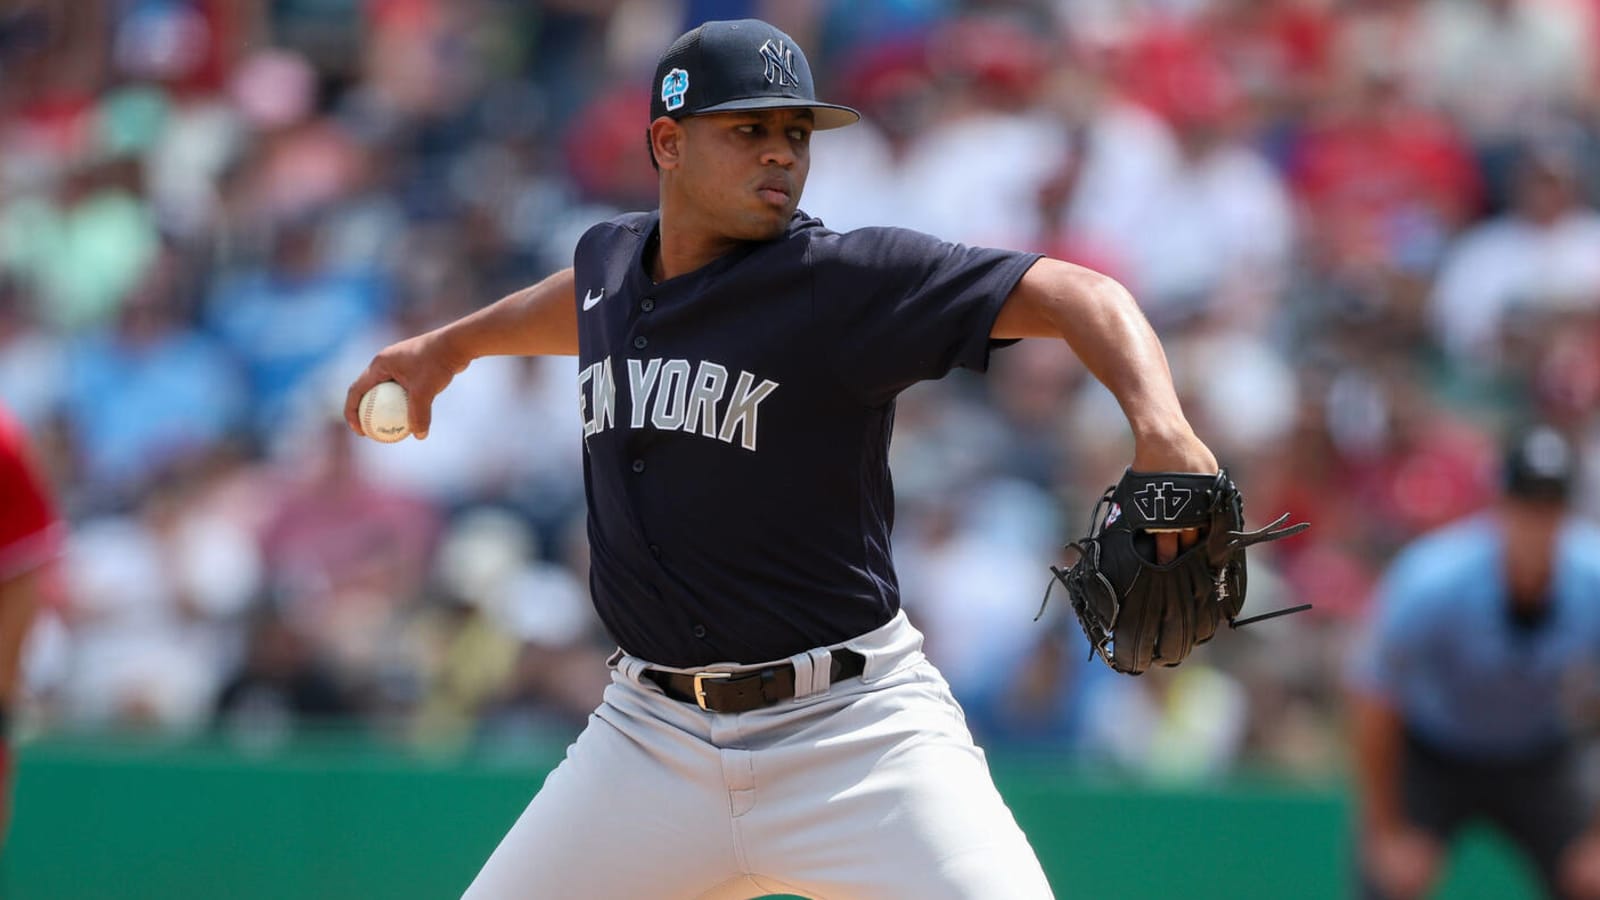 Yankees pitching prospect expected to make MLB debut Friday